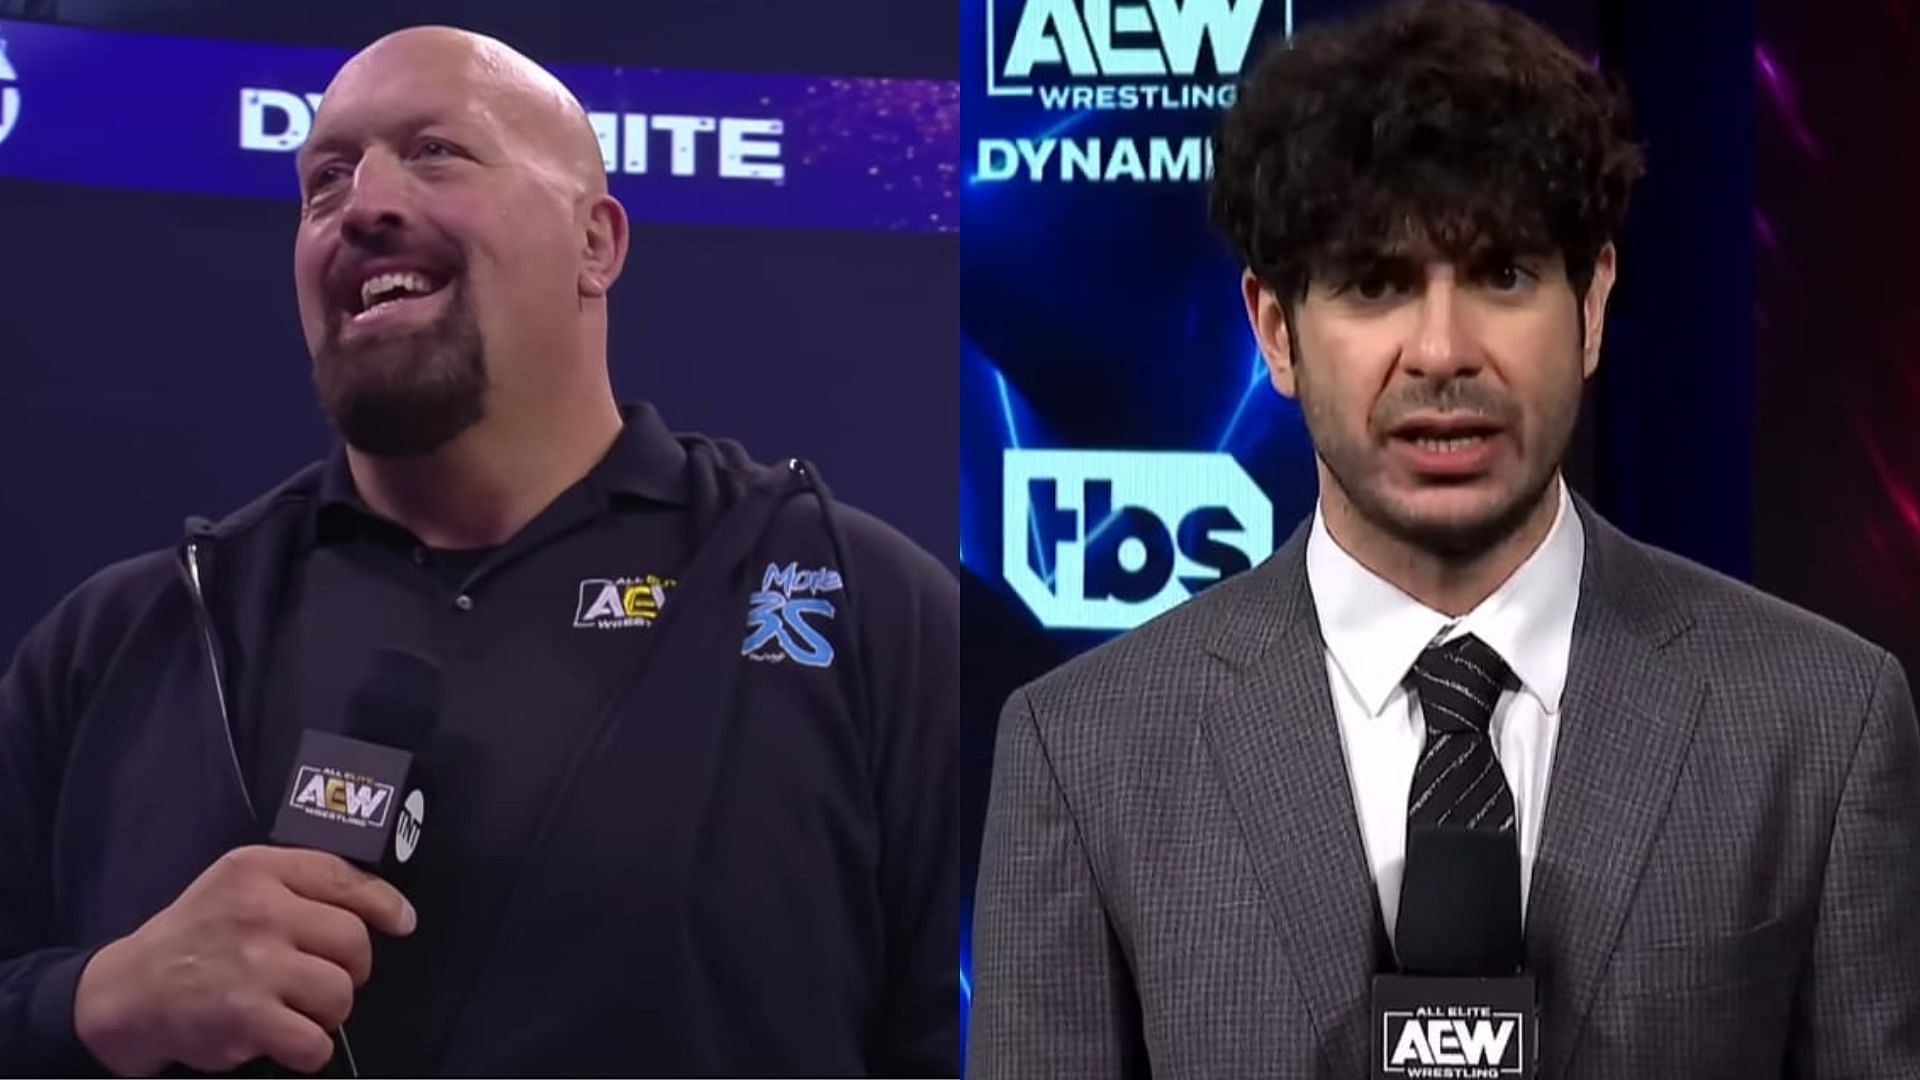 As great as he is as a booker, Tony Khan has struggled to elevate the giants on the AEW roster. [Image credits: AEW YouTube channel]